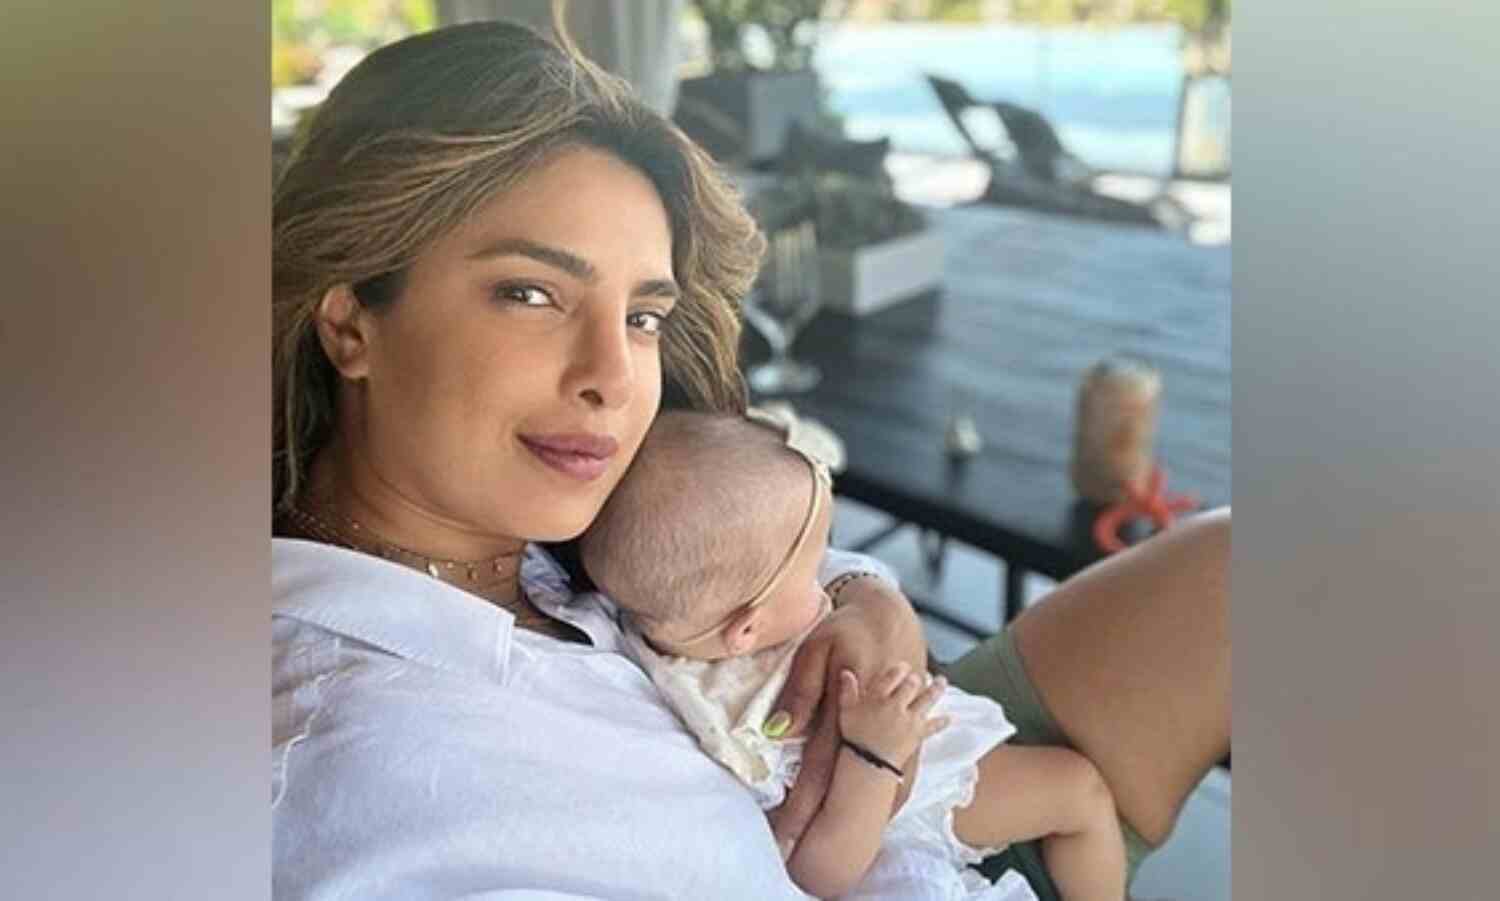 Its Glam up day for Priyanka Chopra and her daughter Malti Marie